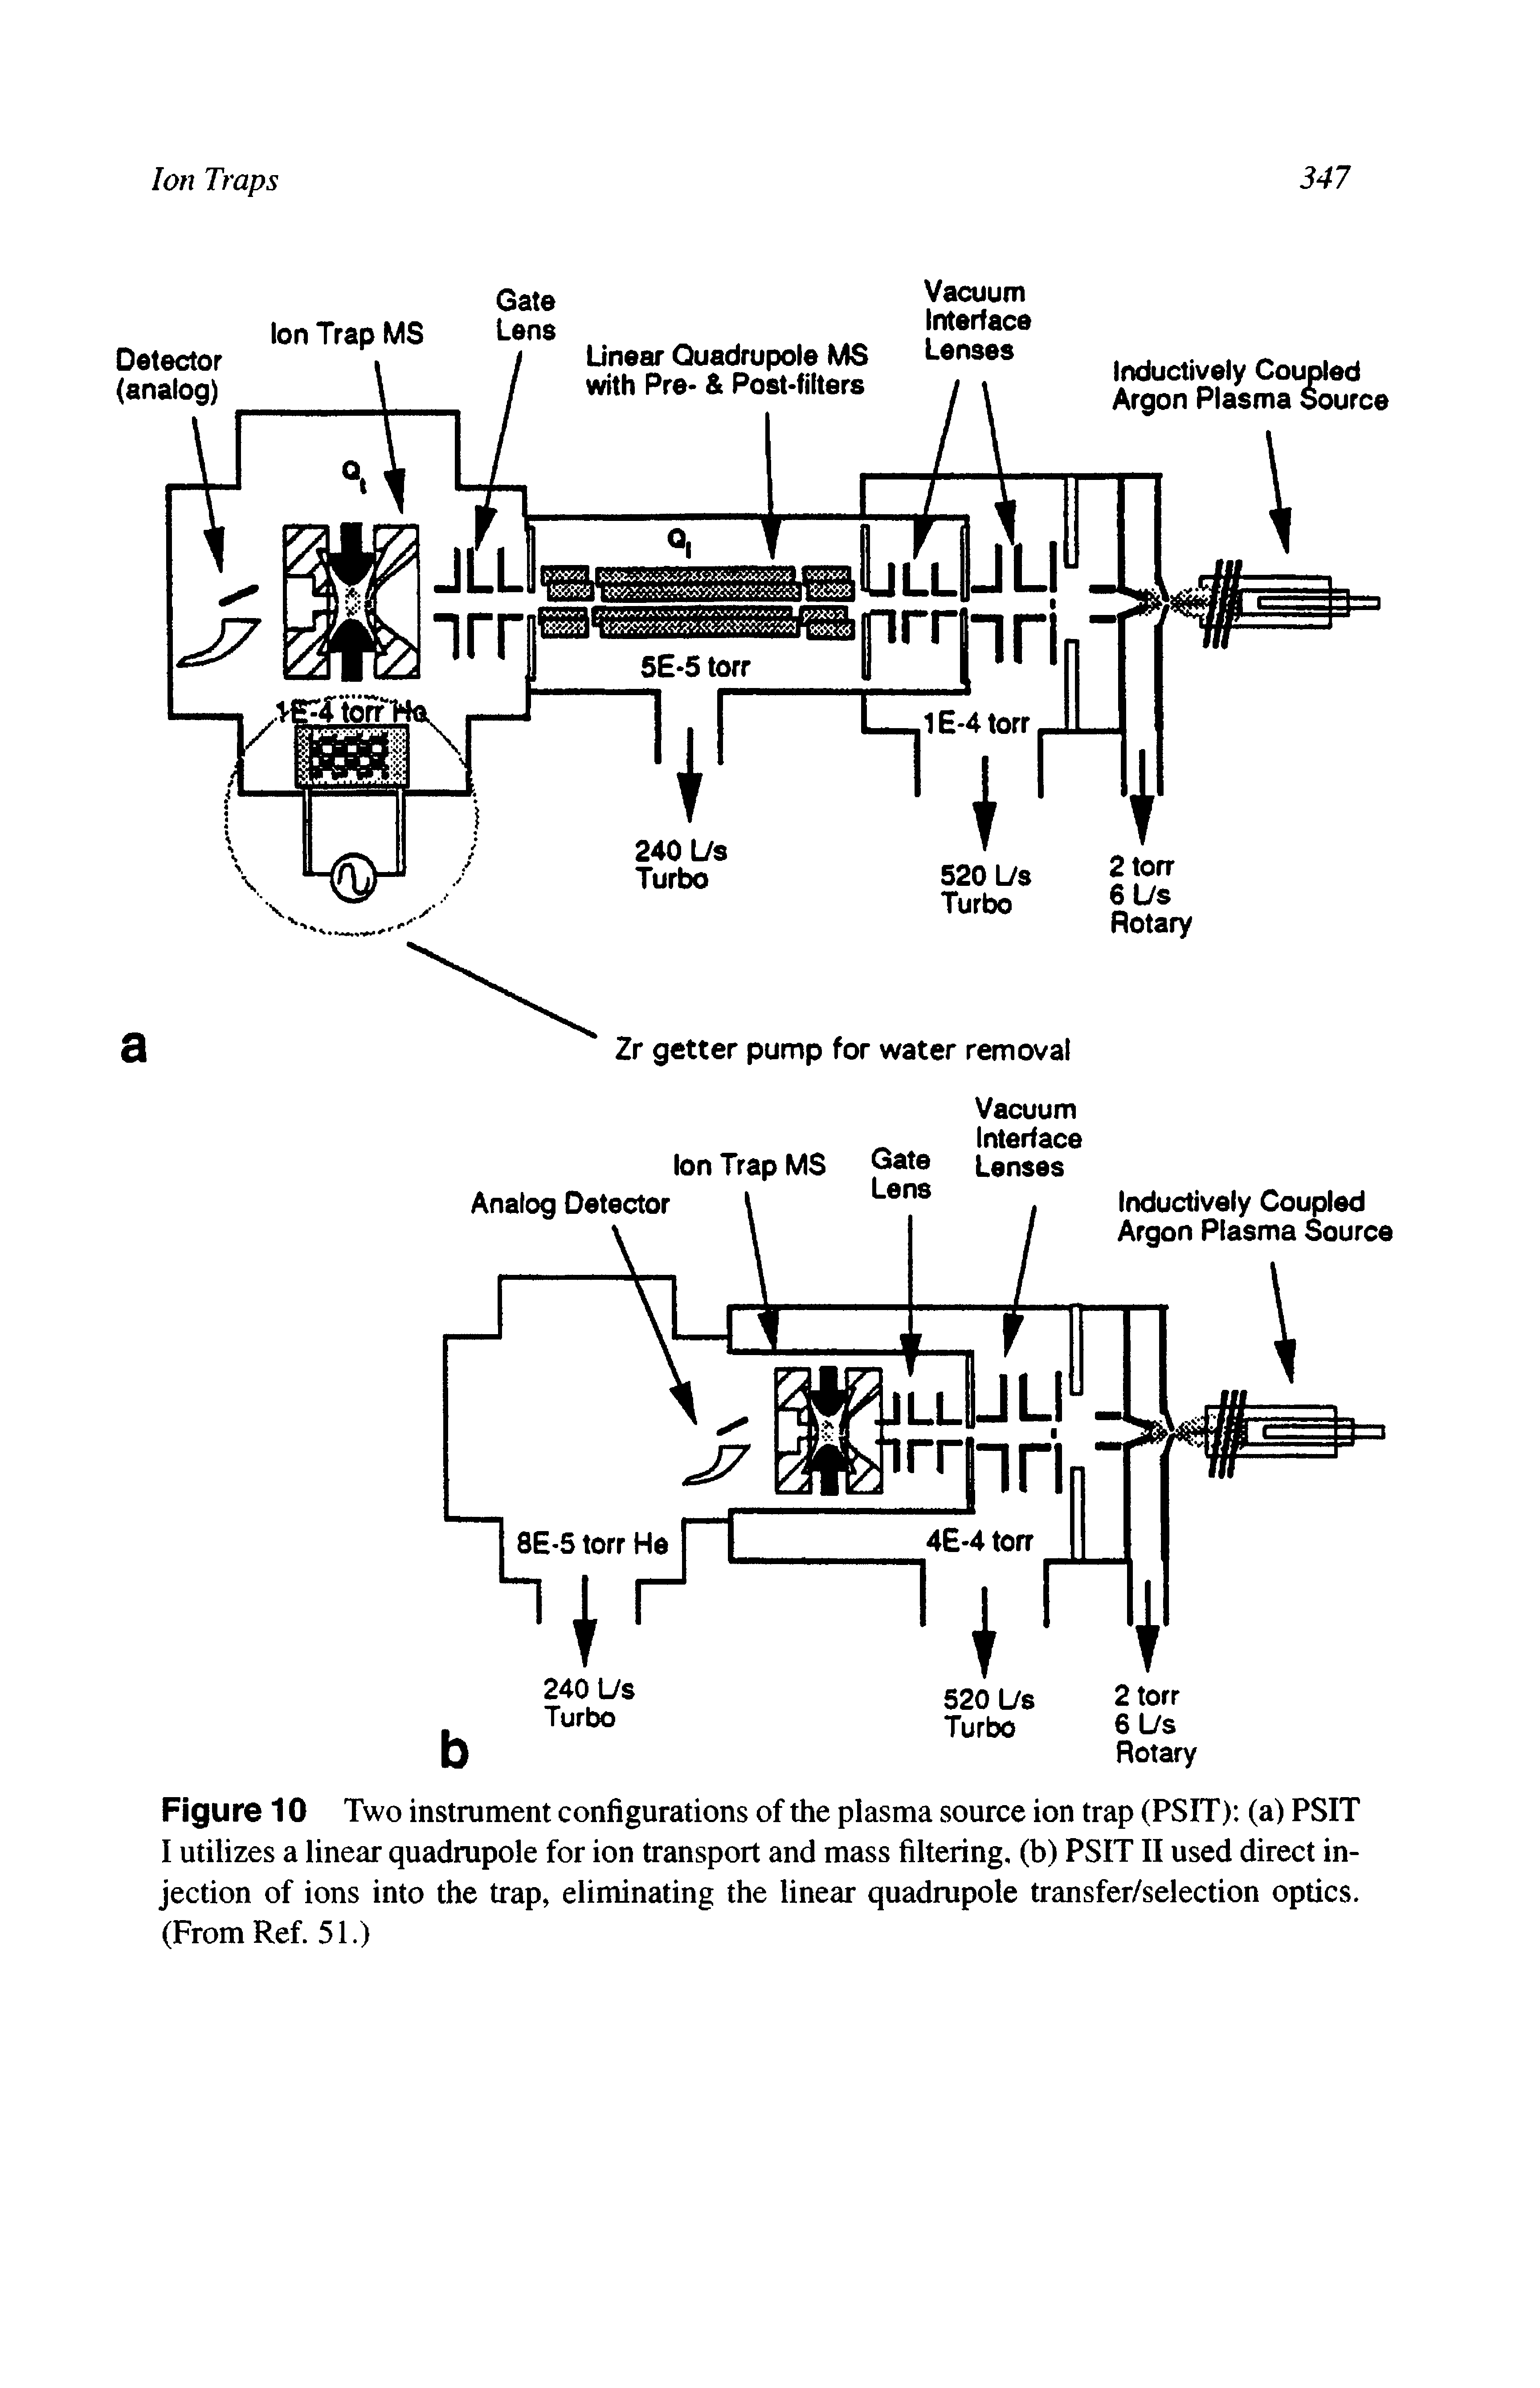 Figure 10 Two instrument configurations of the plasma source ion trap (PSIT) (a) PSIT I utilizes a linear quadrupole for ion transport and mass filtering, (b) PSIT II used direct injection of ions into the trap, eliminating the linear quadrupole transfer/selection optics. (From Ref. 51.)...